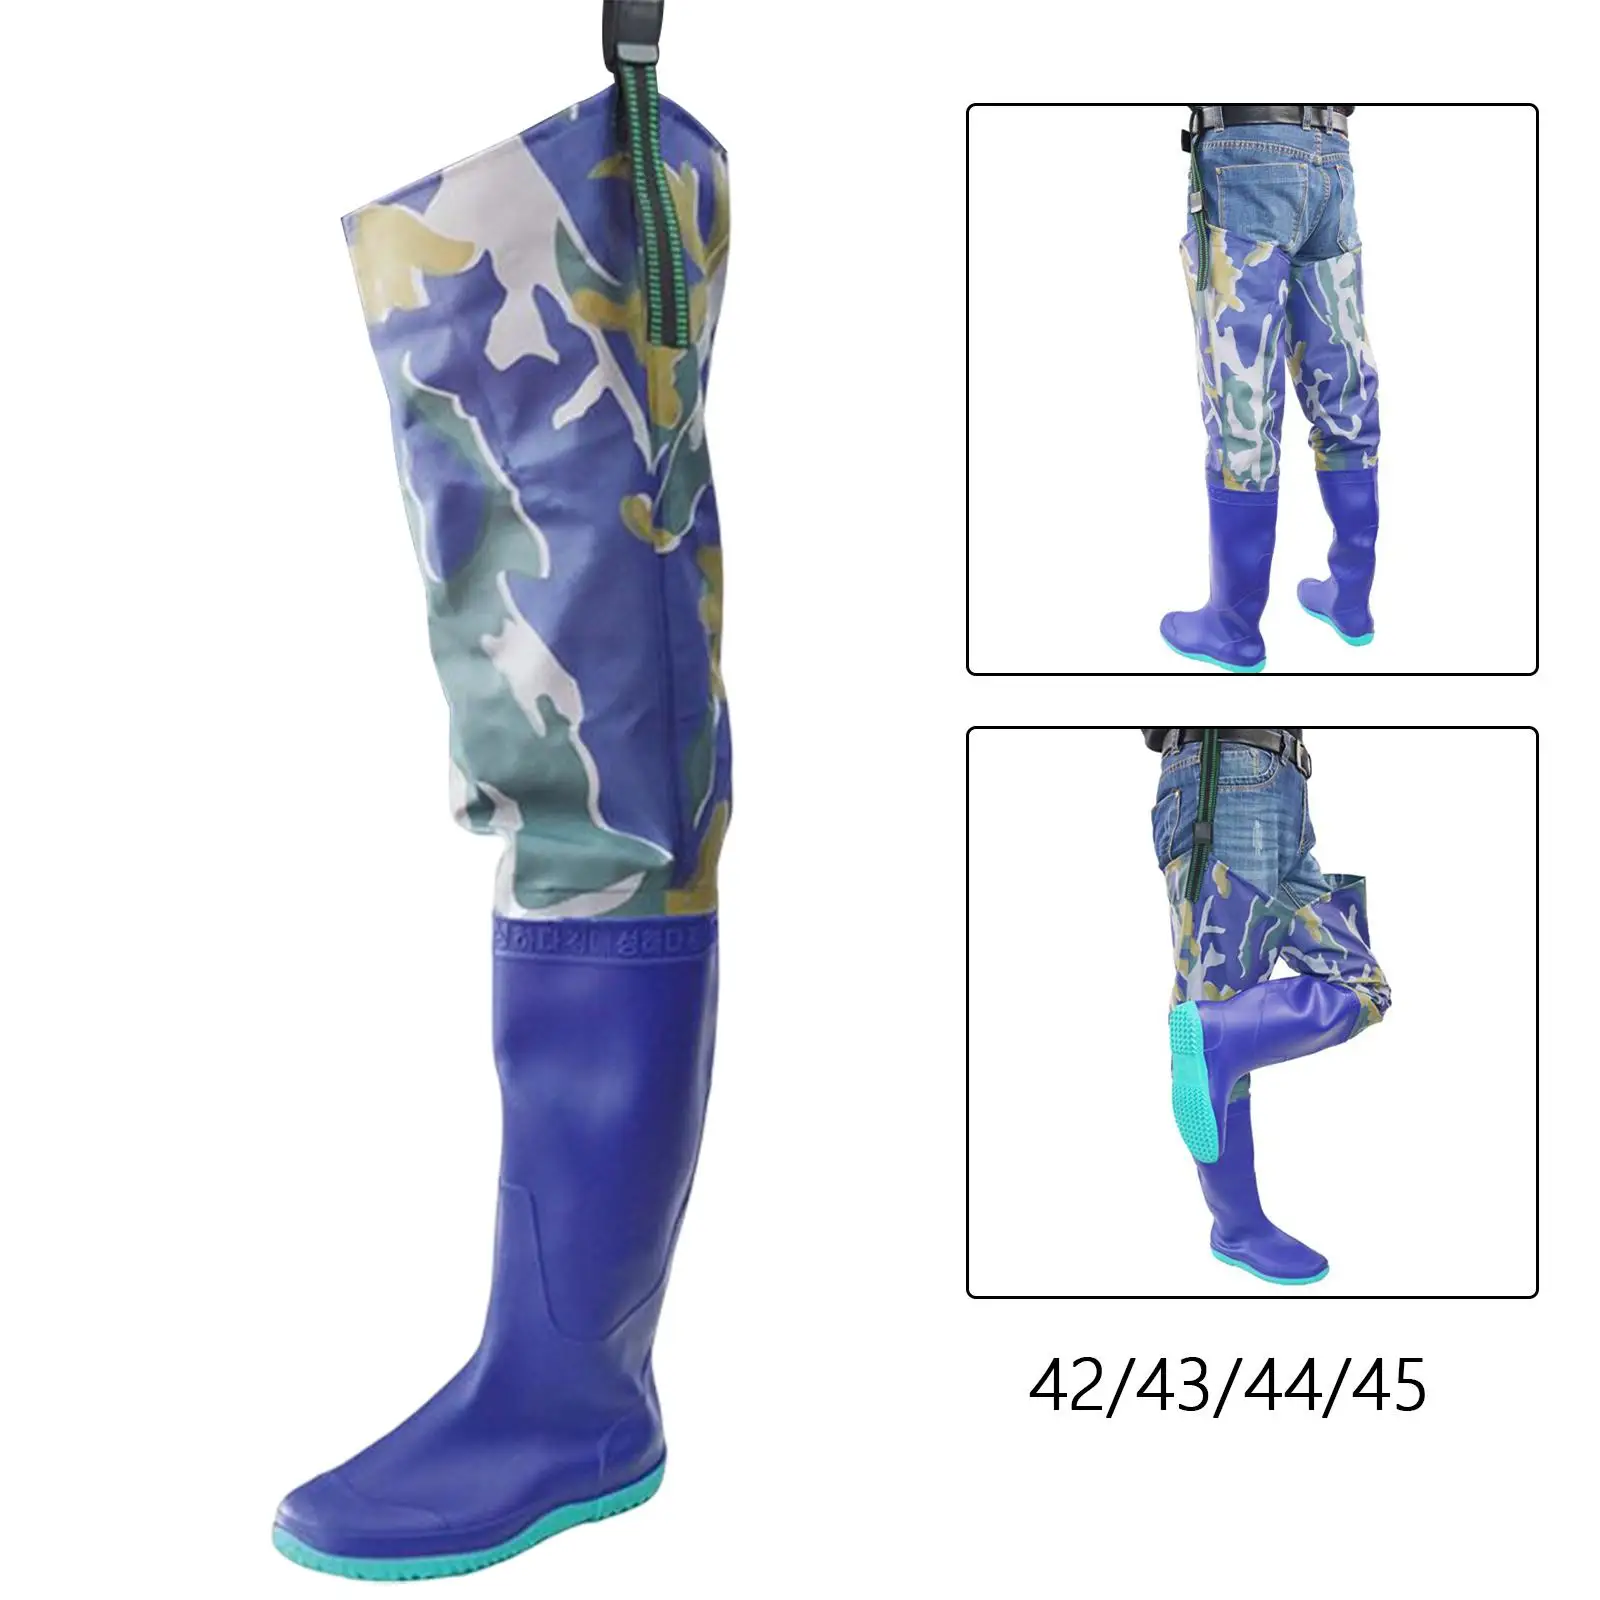 Hip Waders Watertight Hip Boots for Men Women Wading Pants Thigh Waders Wellies Fishing Waders for Wading Fishing Agriculture